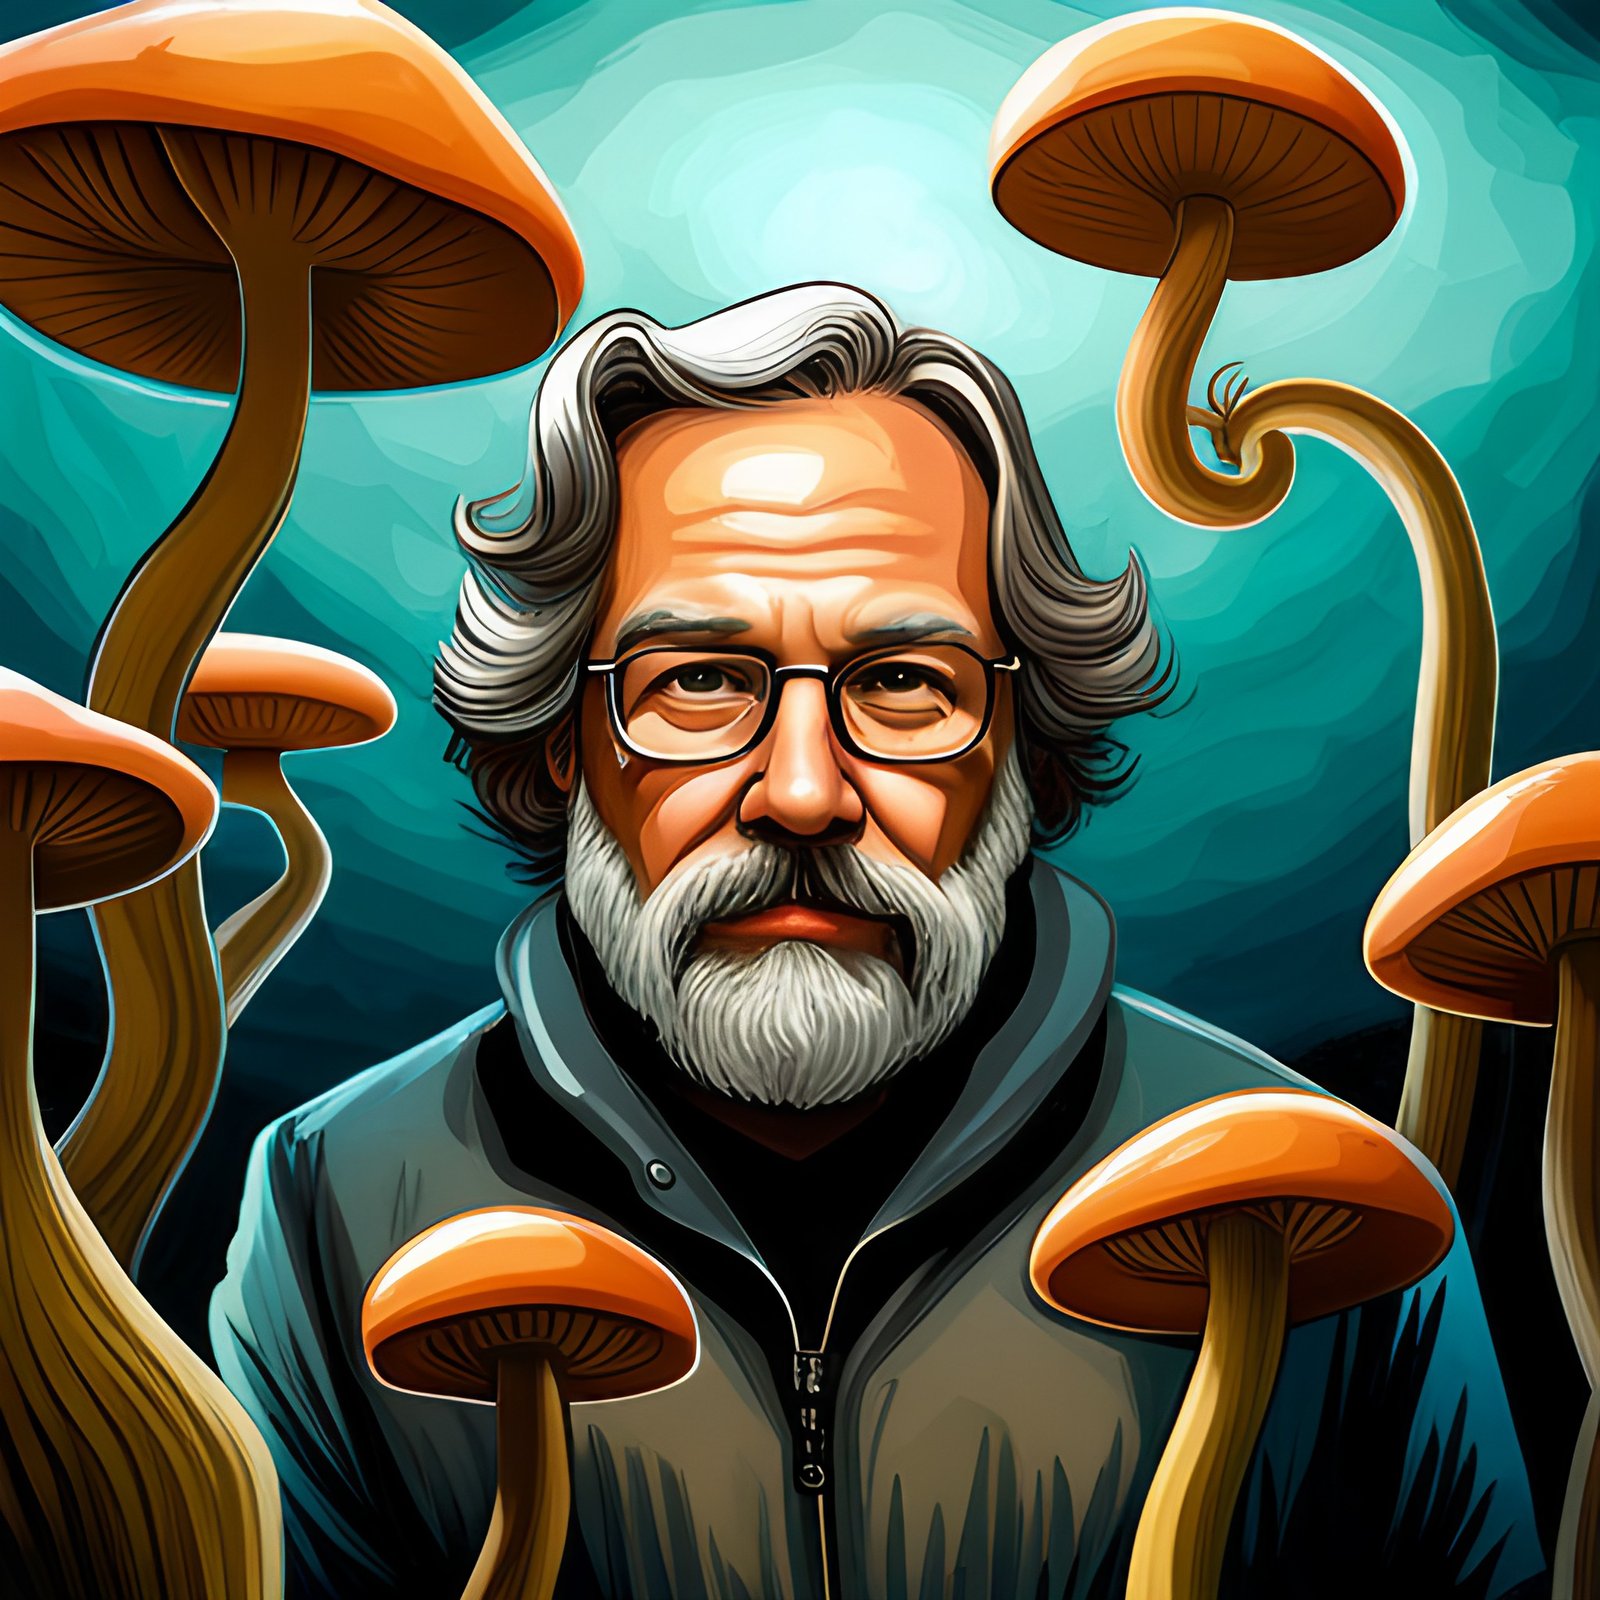 The Revolutionary Insights of Paul Stamets on the Effects of Microdosing Mushrooms